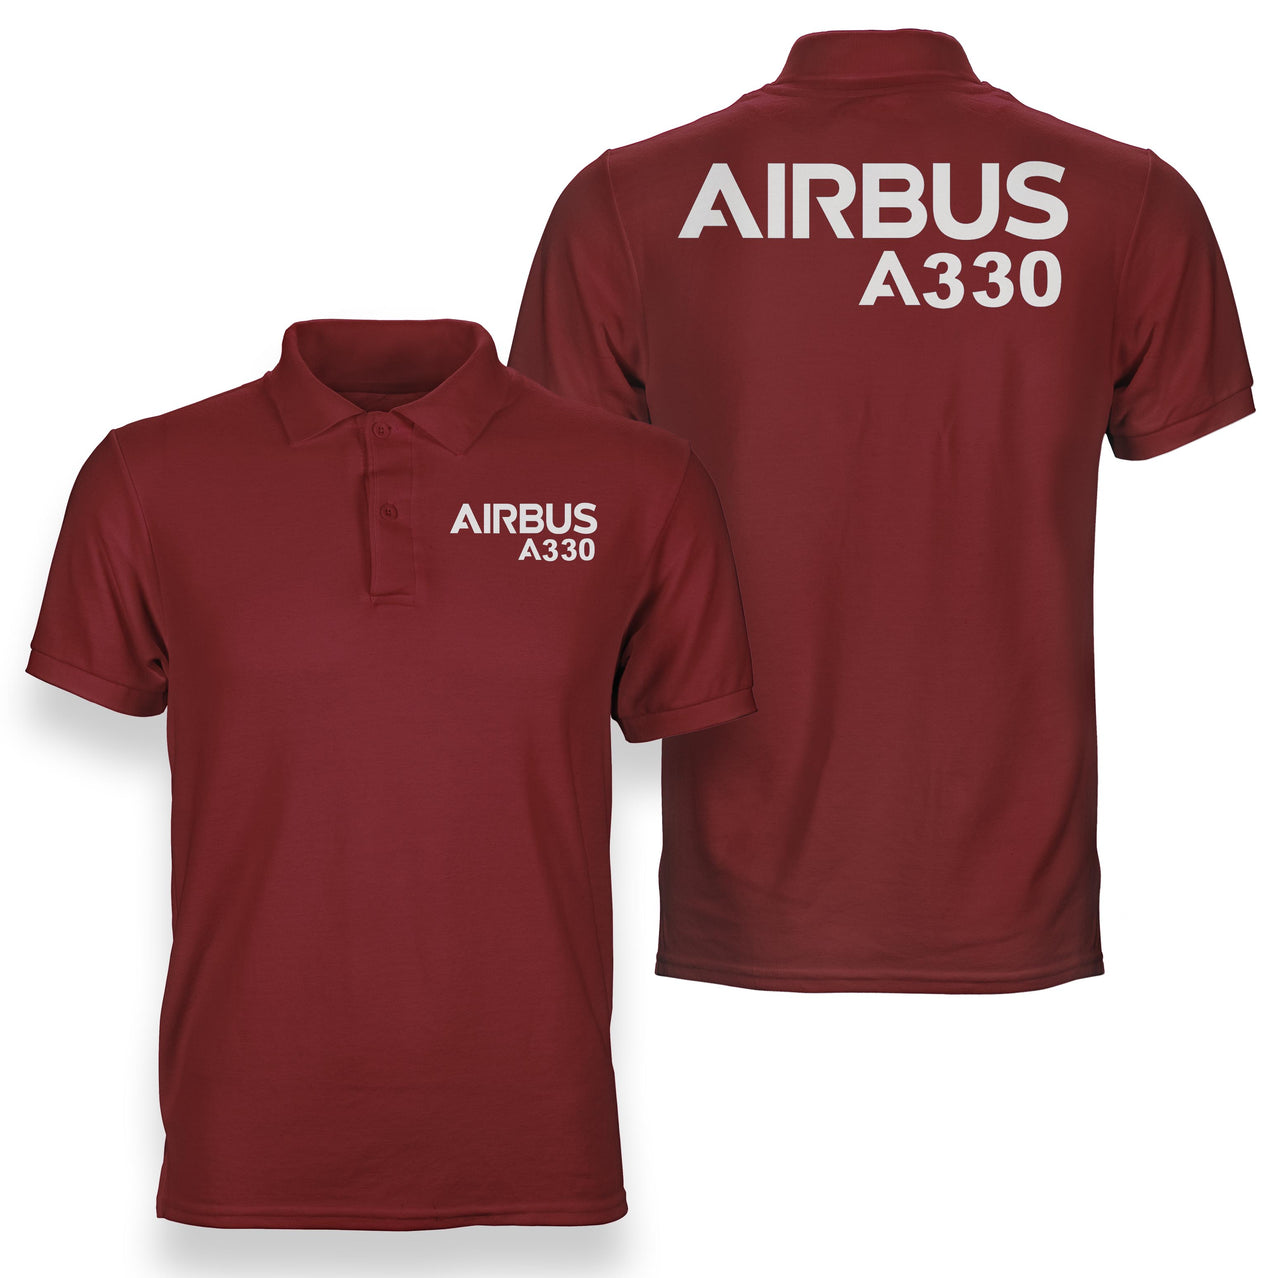 Airbus A330 & Text Designed Double Side Polo T-Shirts